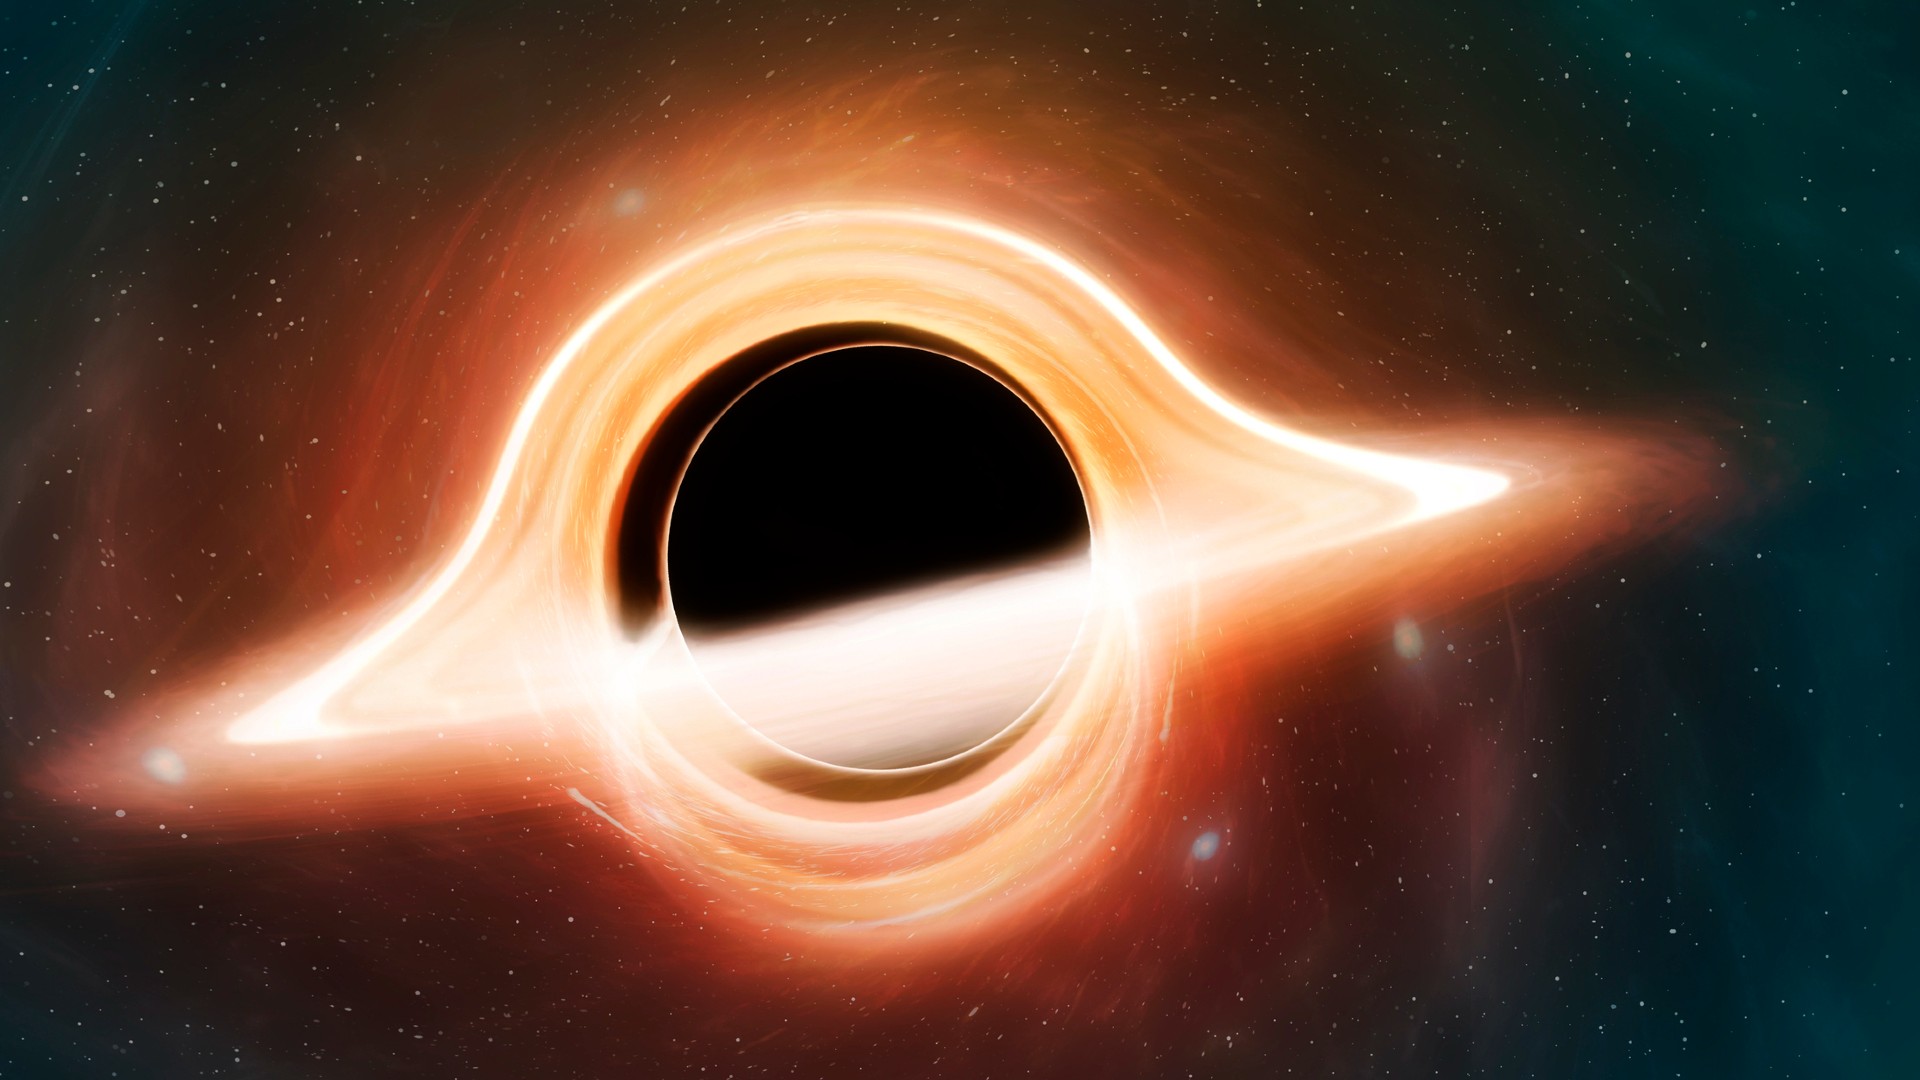 An illustration of a black hole with a large spherical black void surrounded by bright orange and white material.